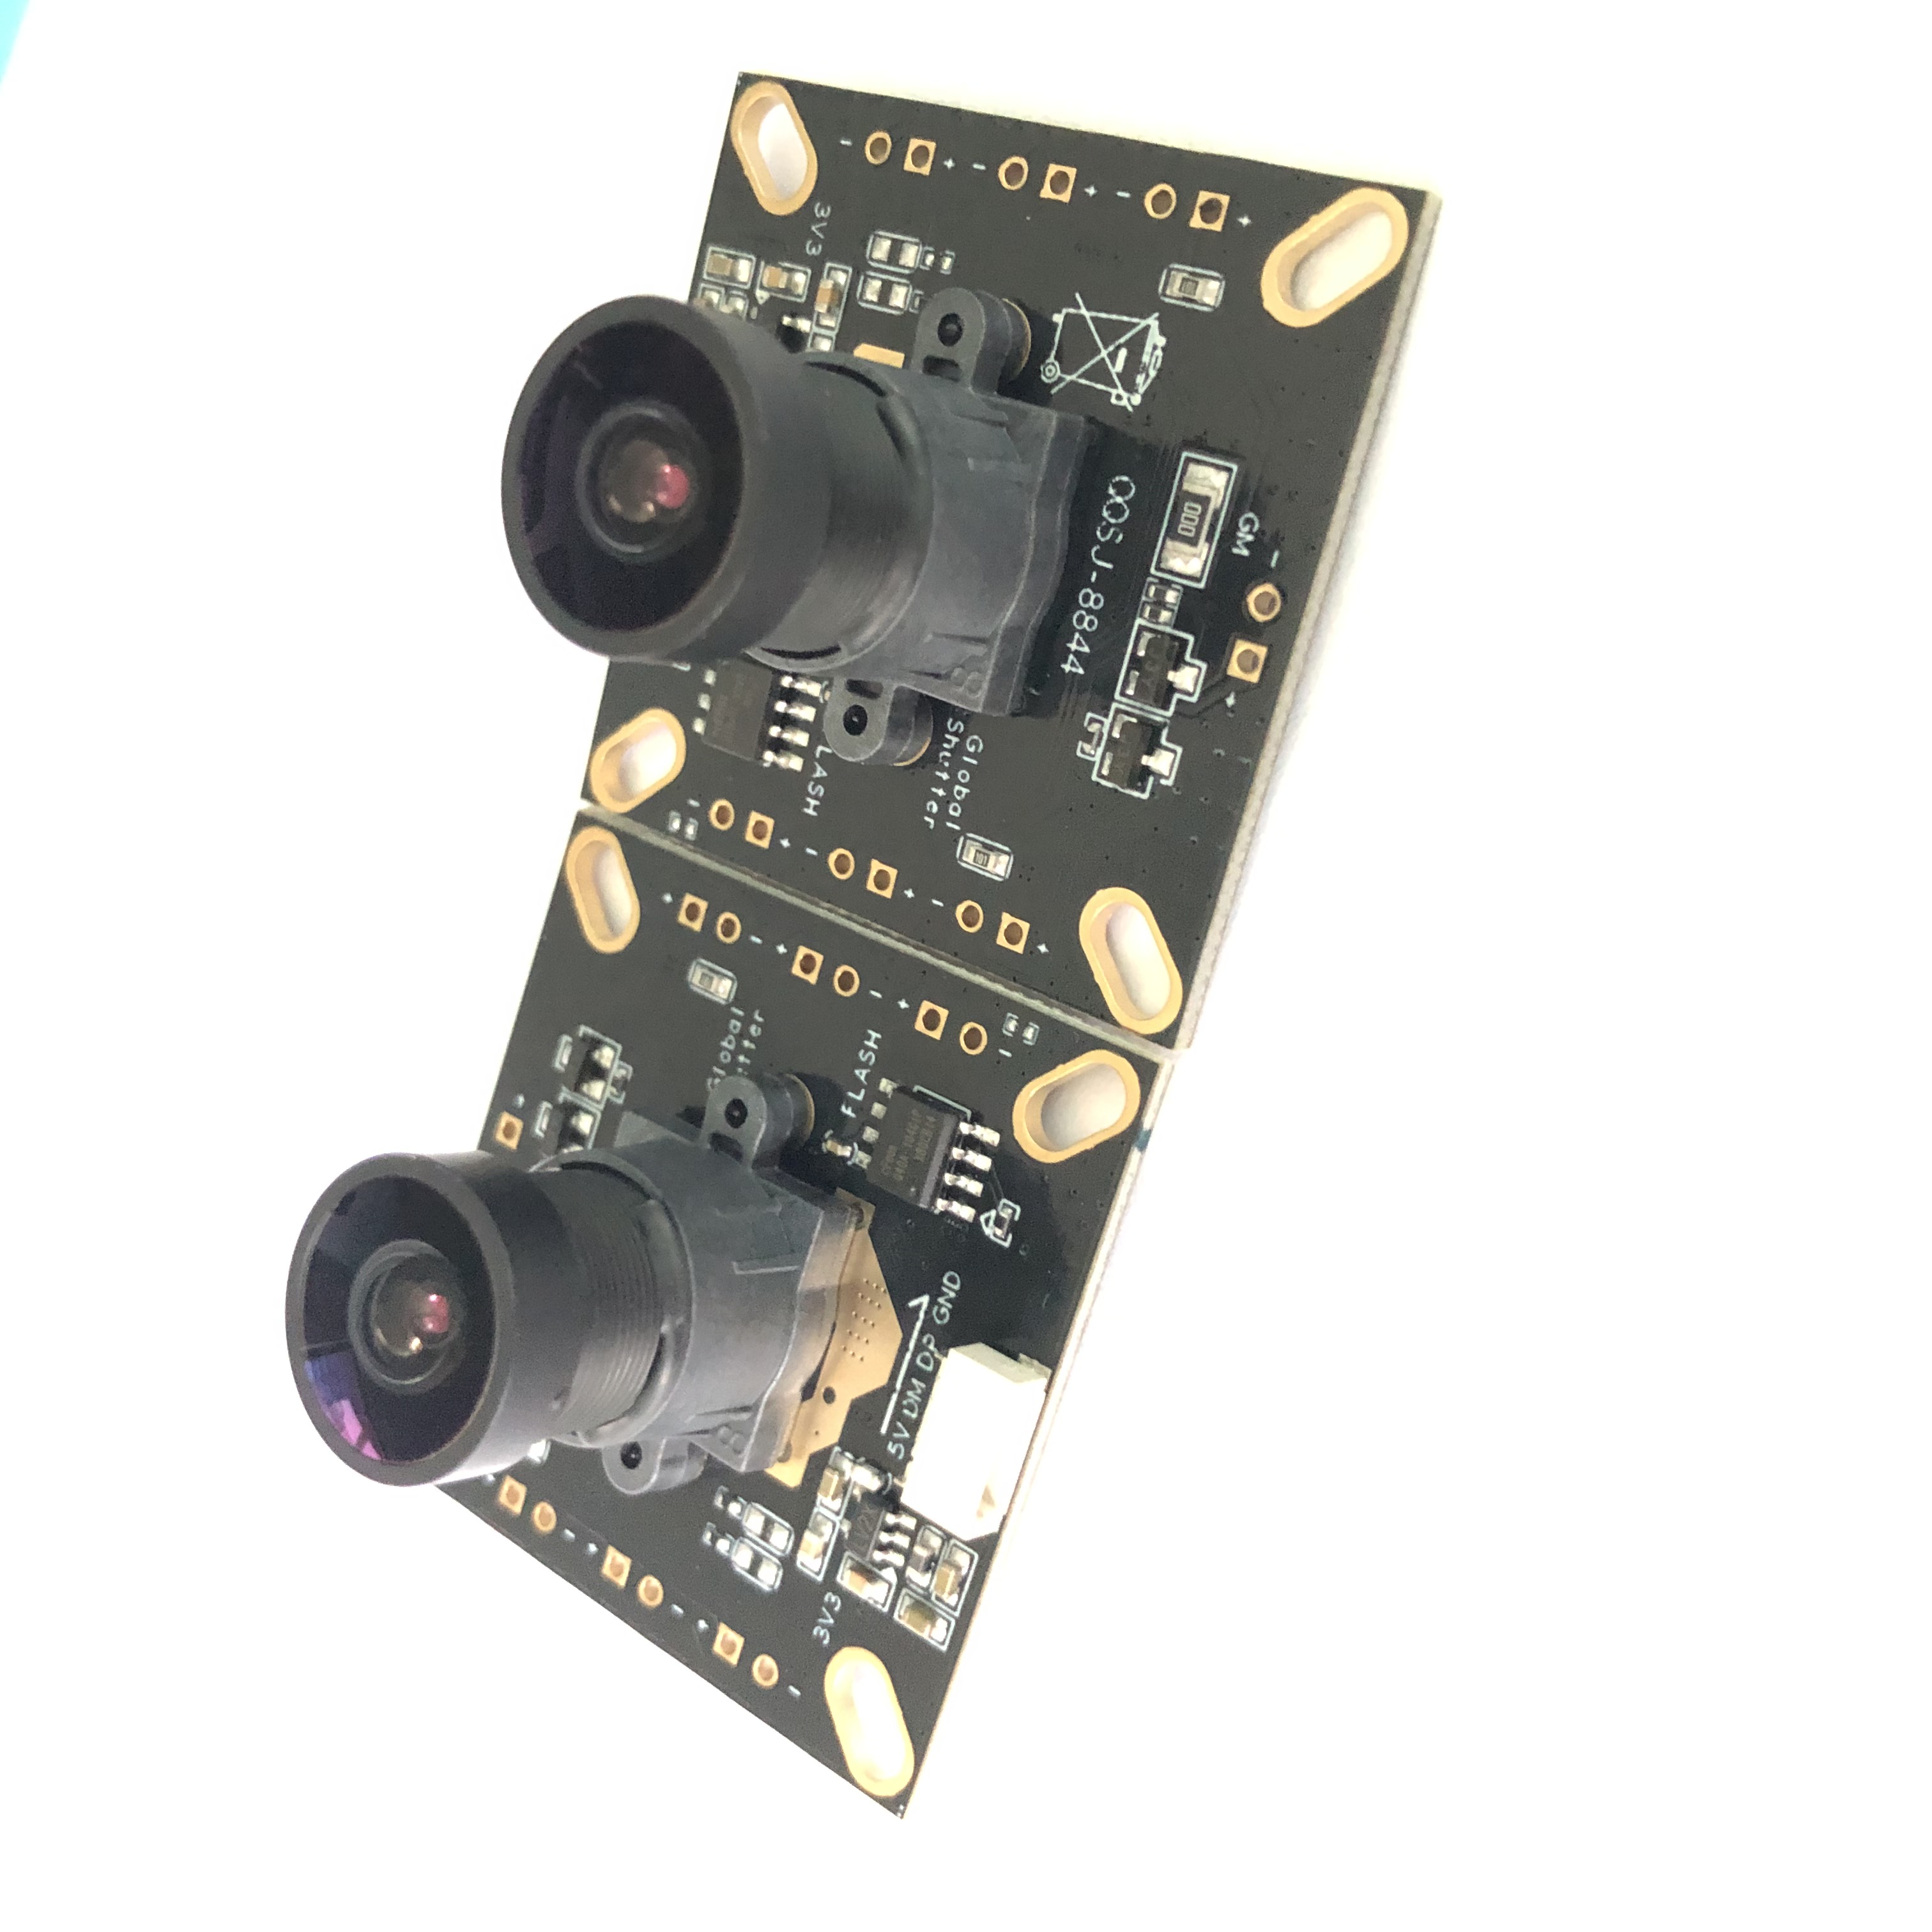 Hot Sale for Ov5640 - AR0144 USB Camera modules  Global exposure Automatic Infrared Switching Module   120fps modules – Ronghua